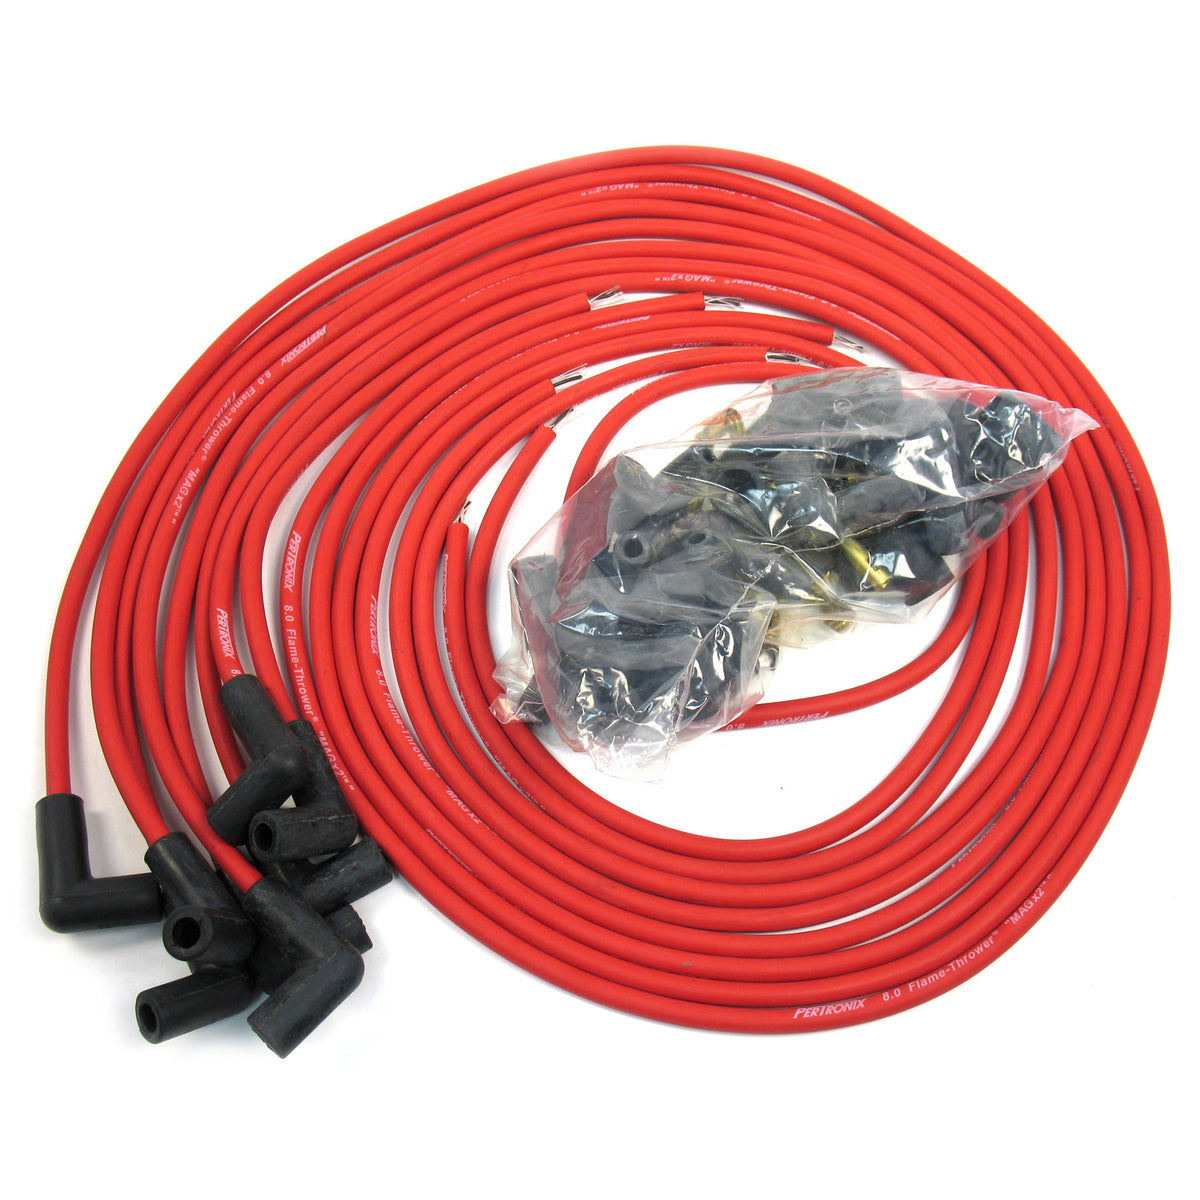 PerTronix 808290 Flame-Thrower Spark Plug Wires 8 cyl 8mm Universal 90 –  Pertronix